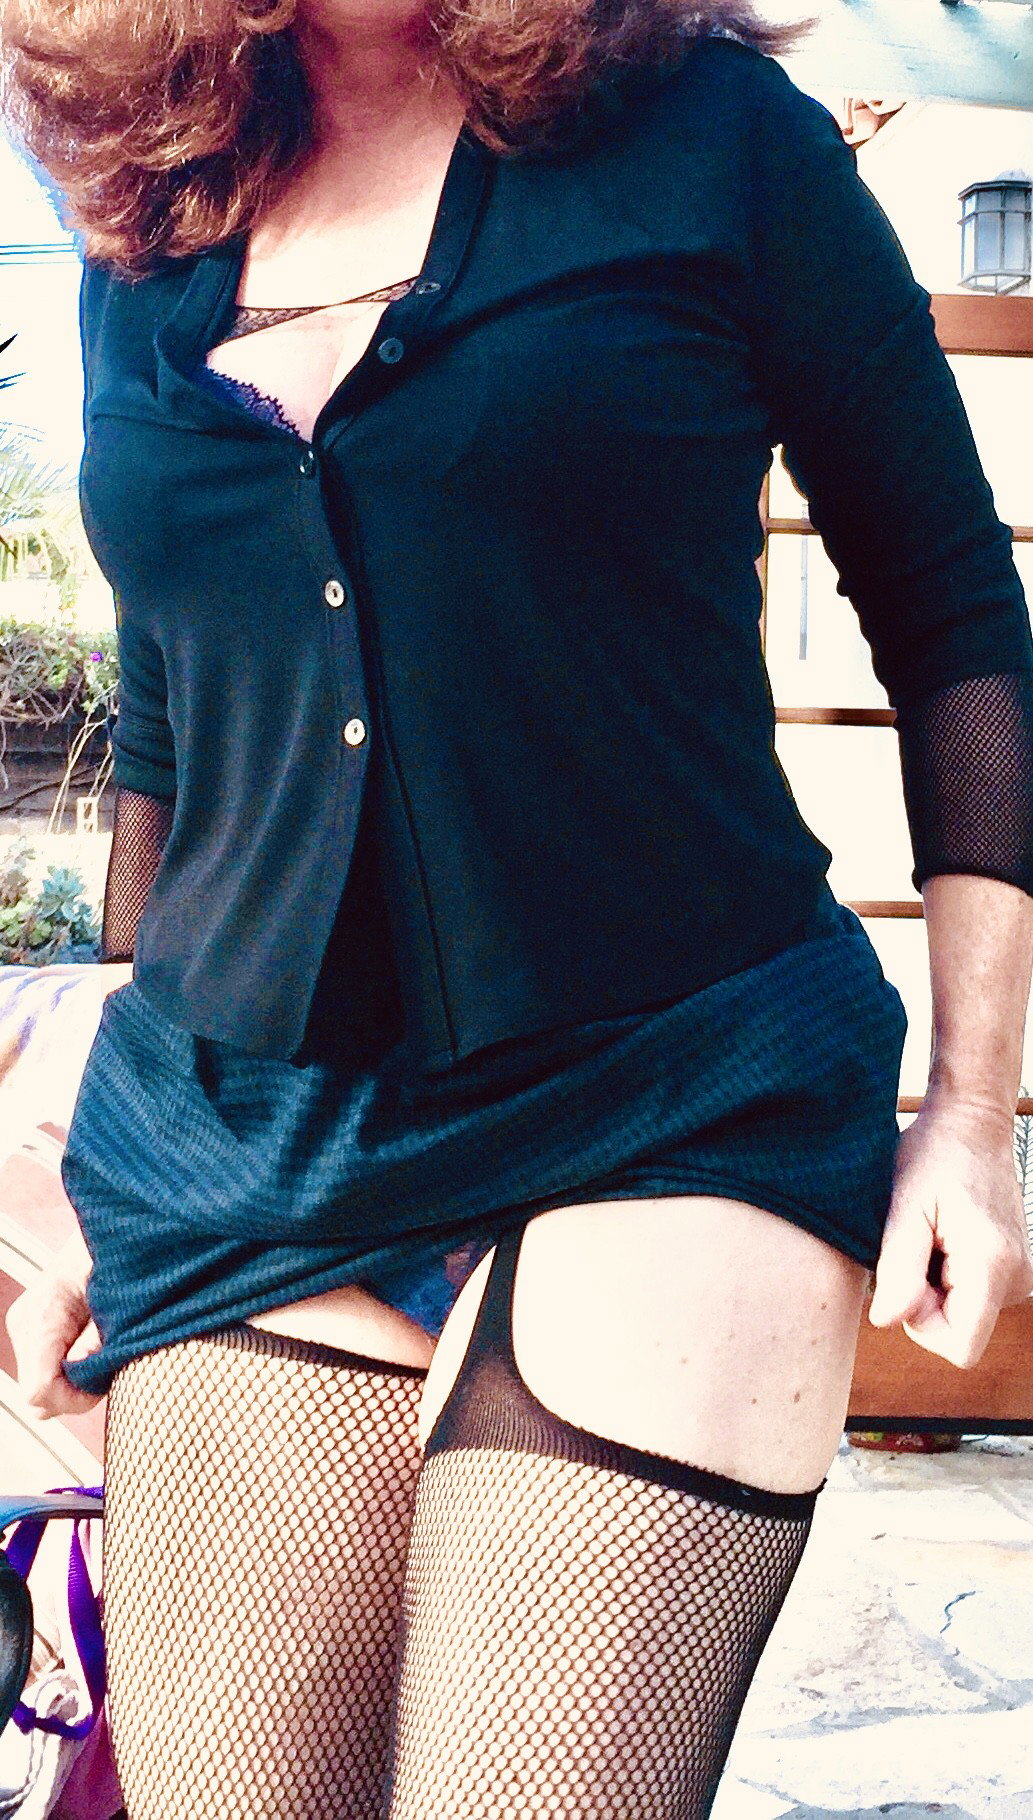 Photo by RedHead Hotwife with the username @RubyRedHeadHotwife,  June 30, 2020 at 12:27 AM. The post is about the topic MILF and the text says 'she knows how to dress when my friends stop by .'